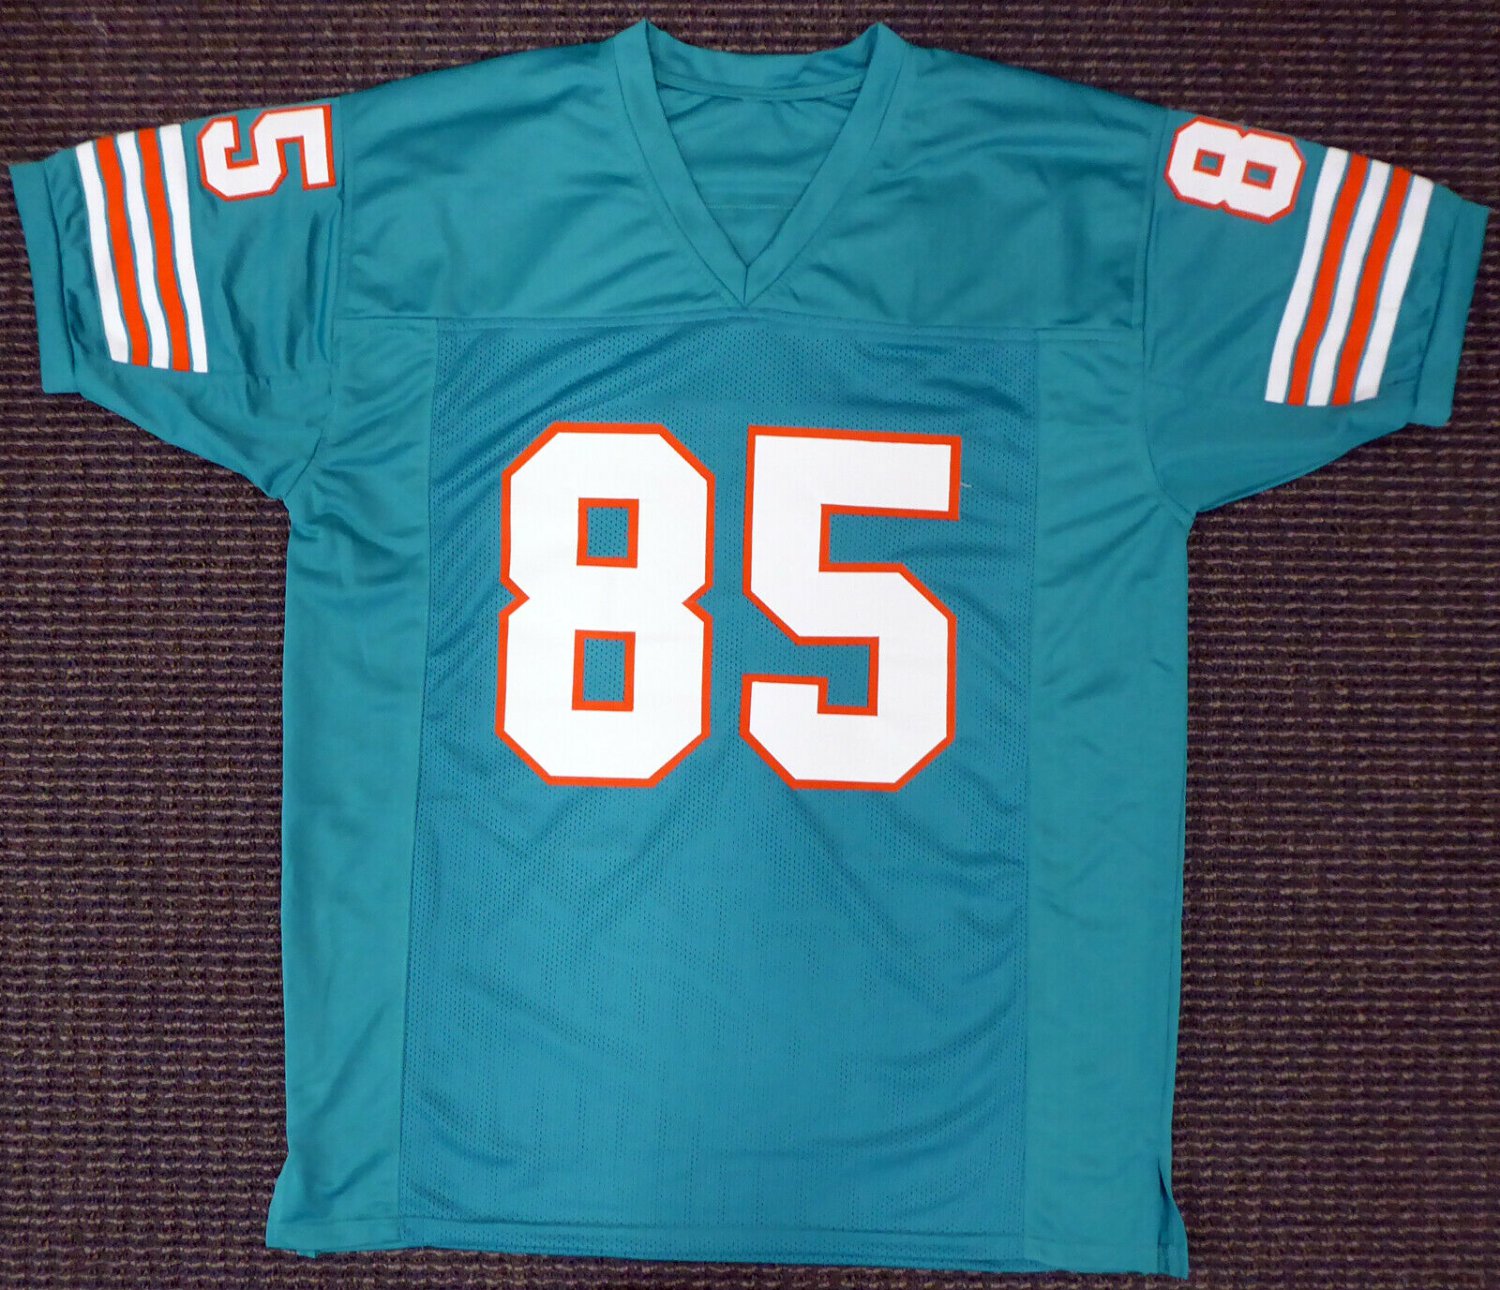 Nick Buoniconti Autographed Signed Miami Dolphins Jersey PSA